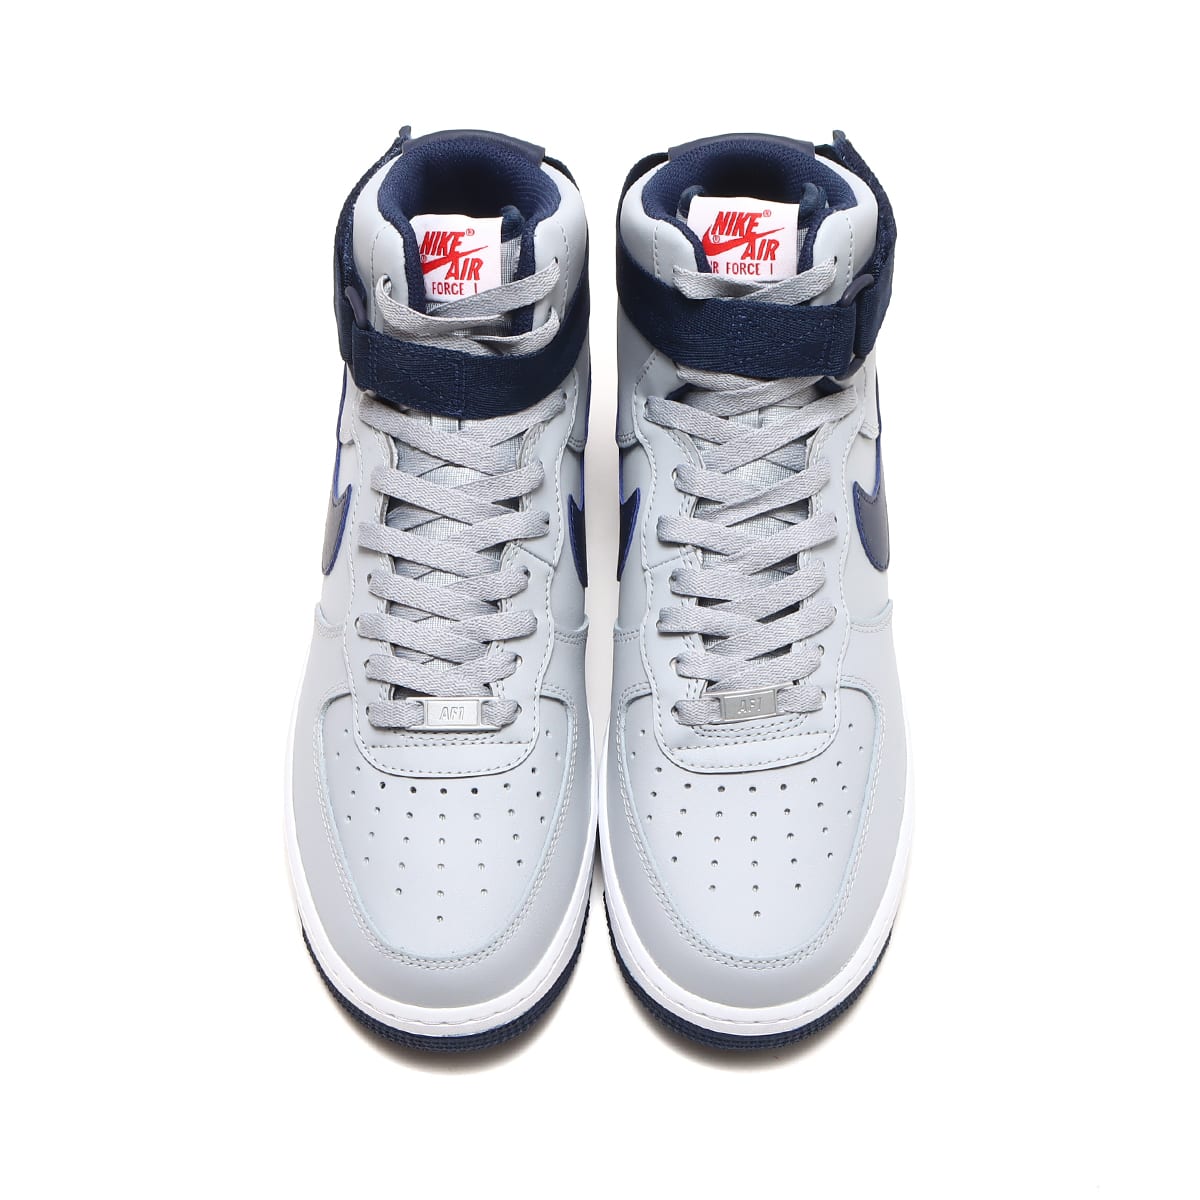 NIKE WMNS AIR FORCE 1 HI QS WOLF GREY/COLLEGE NAVY-UNIVERSITY RED ...